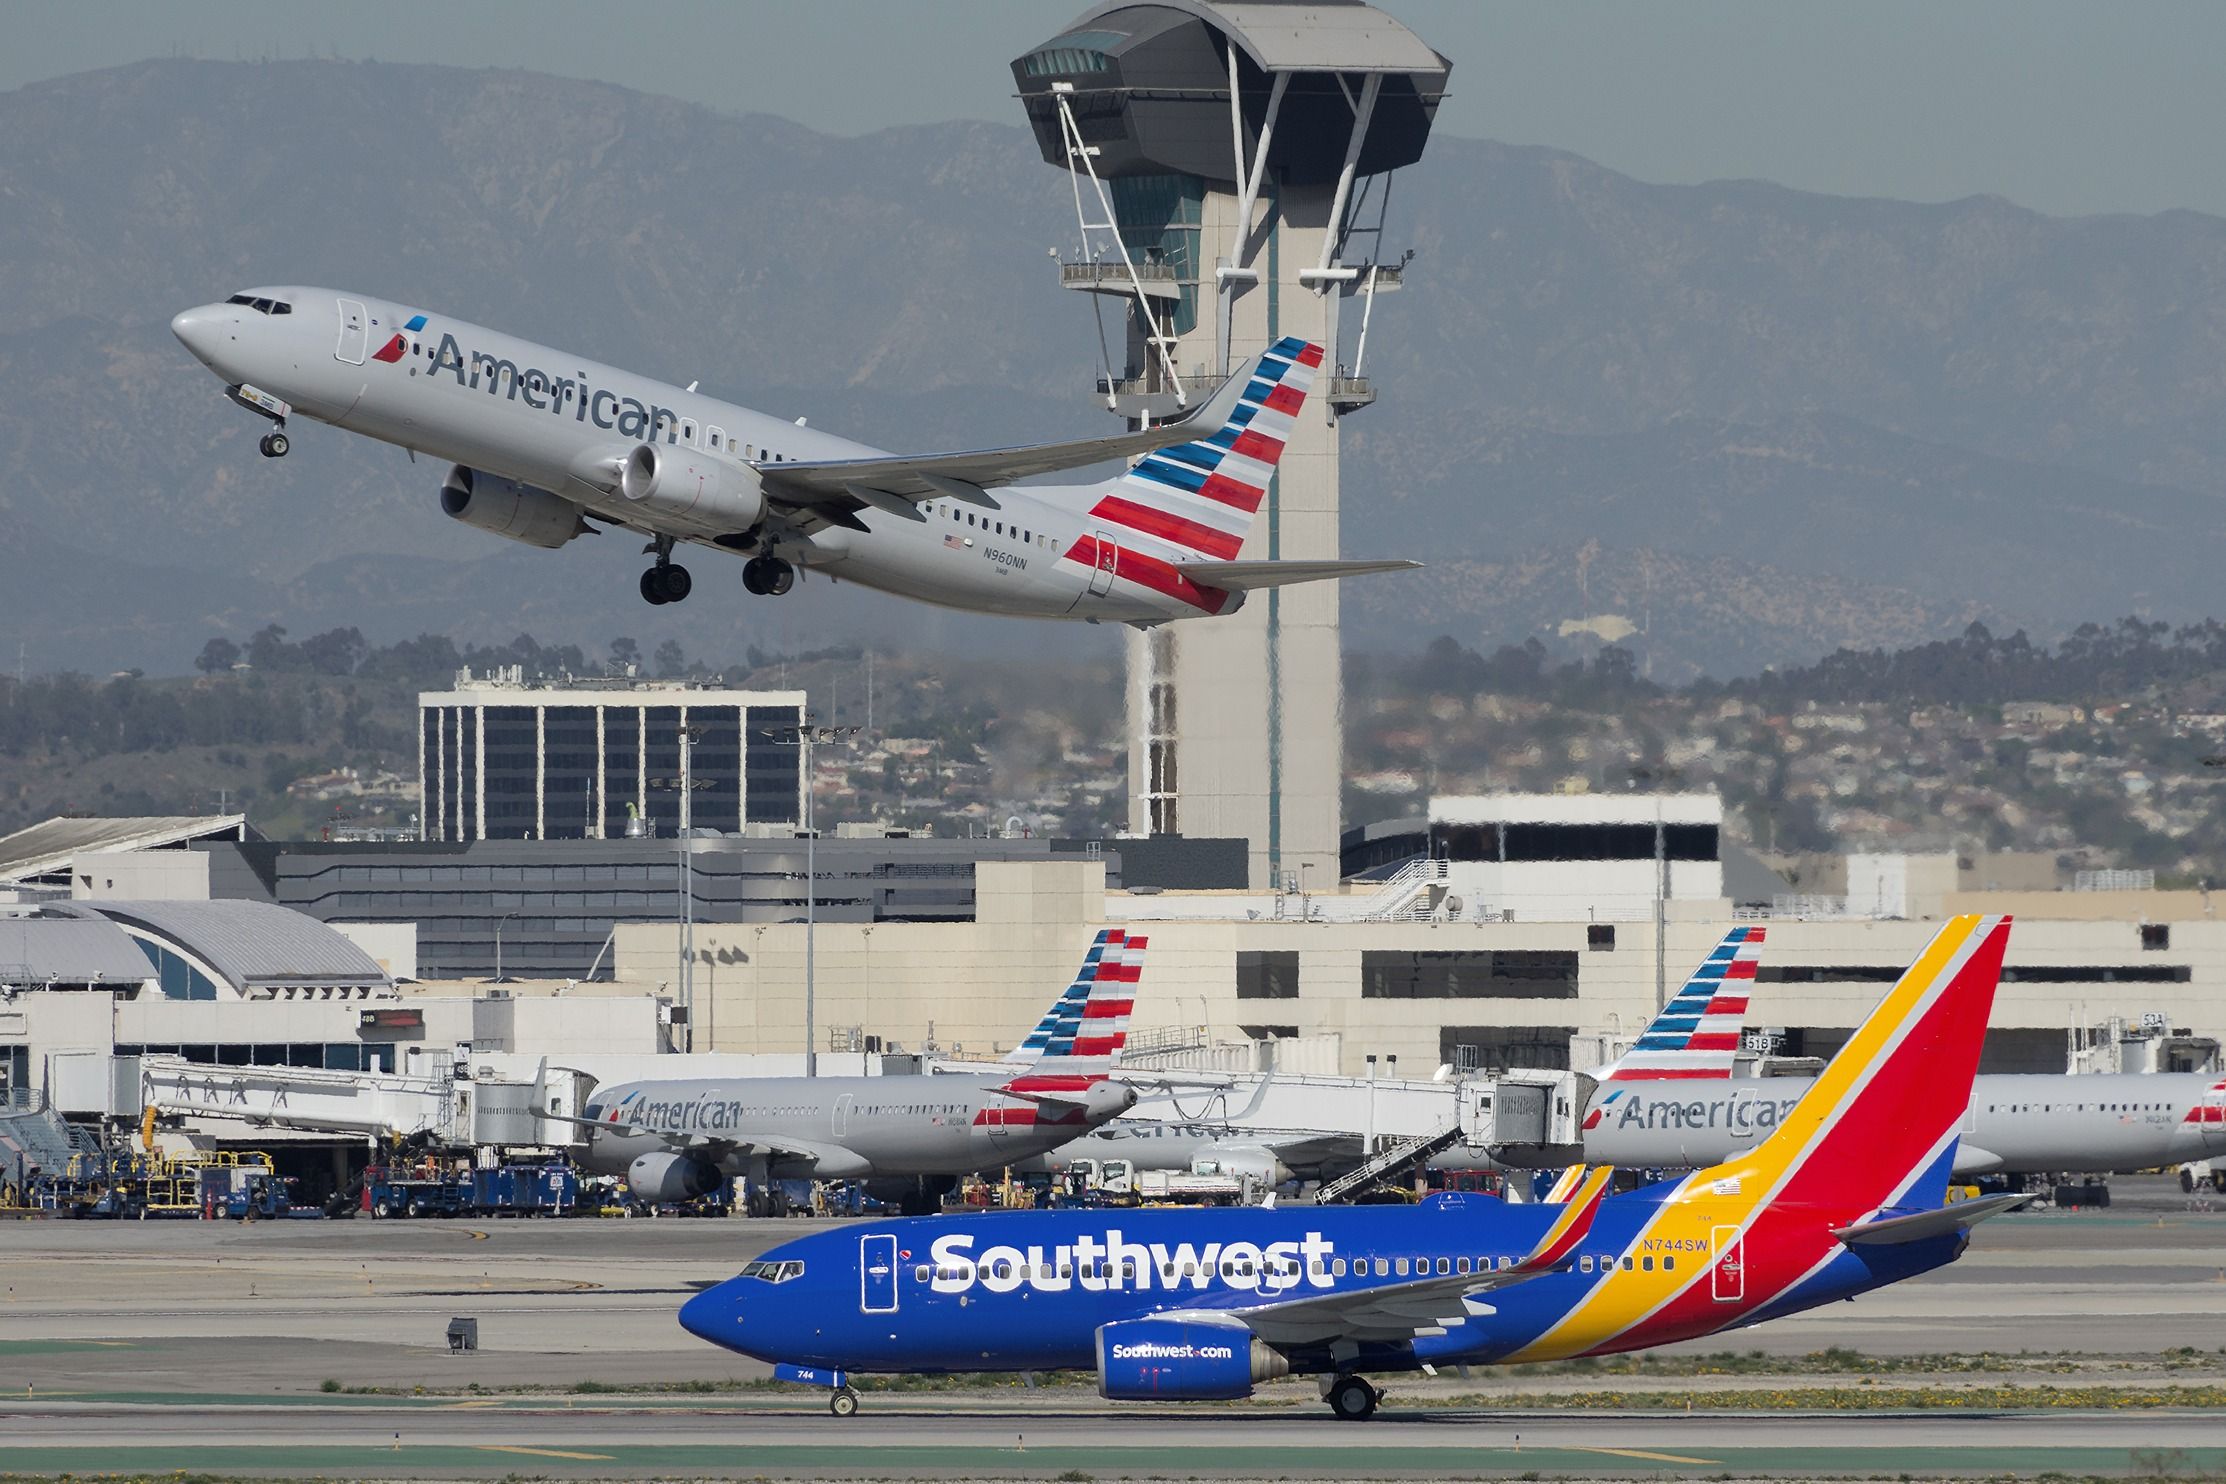 American Airlines and Southwest Airlines Boeing 737 aircraft at Los Angeles International Airport LAX shutterstock_498024874